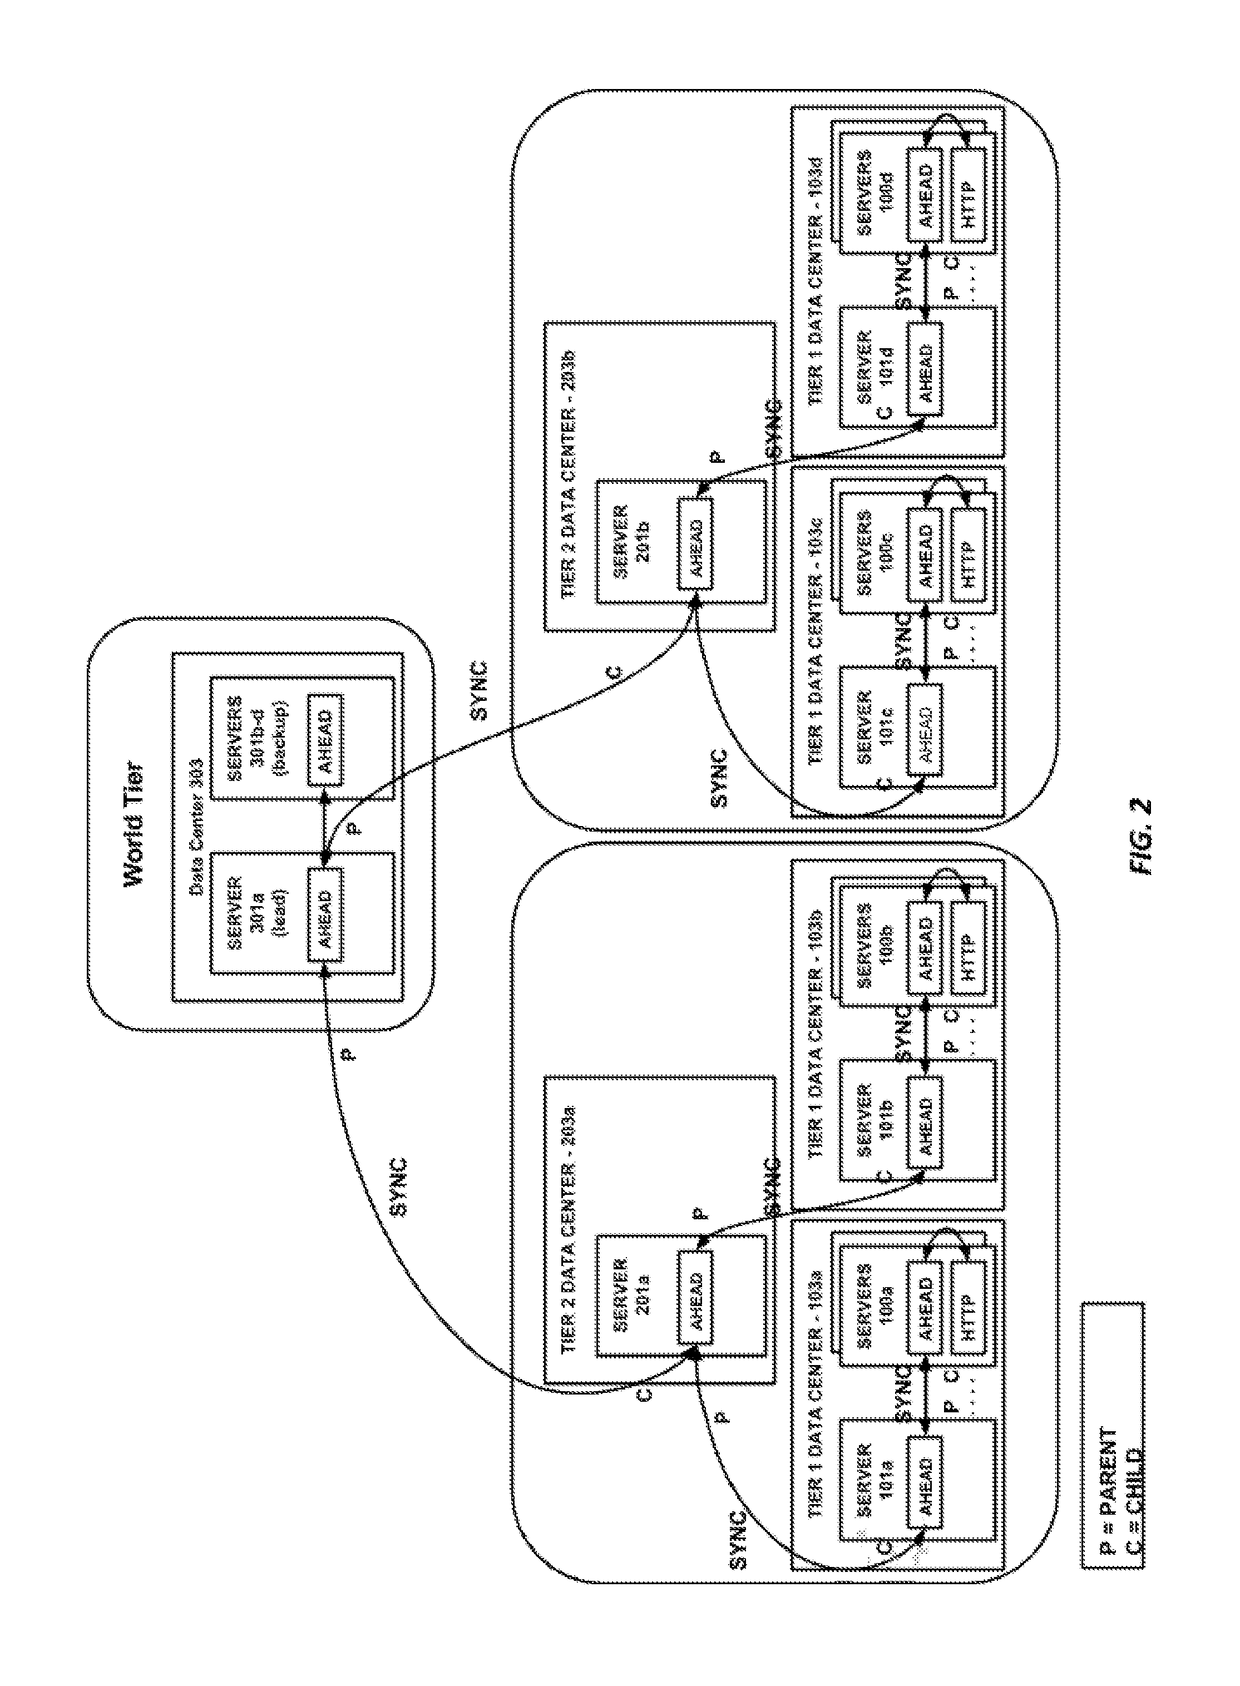 Global usage tracking and quota enforcement in a distributed computing system